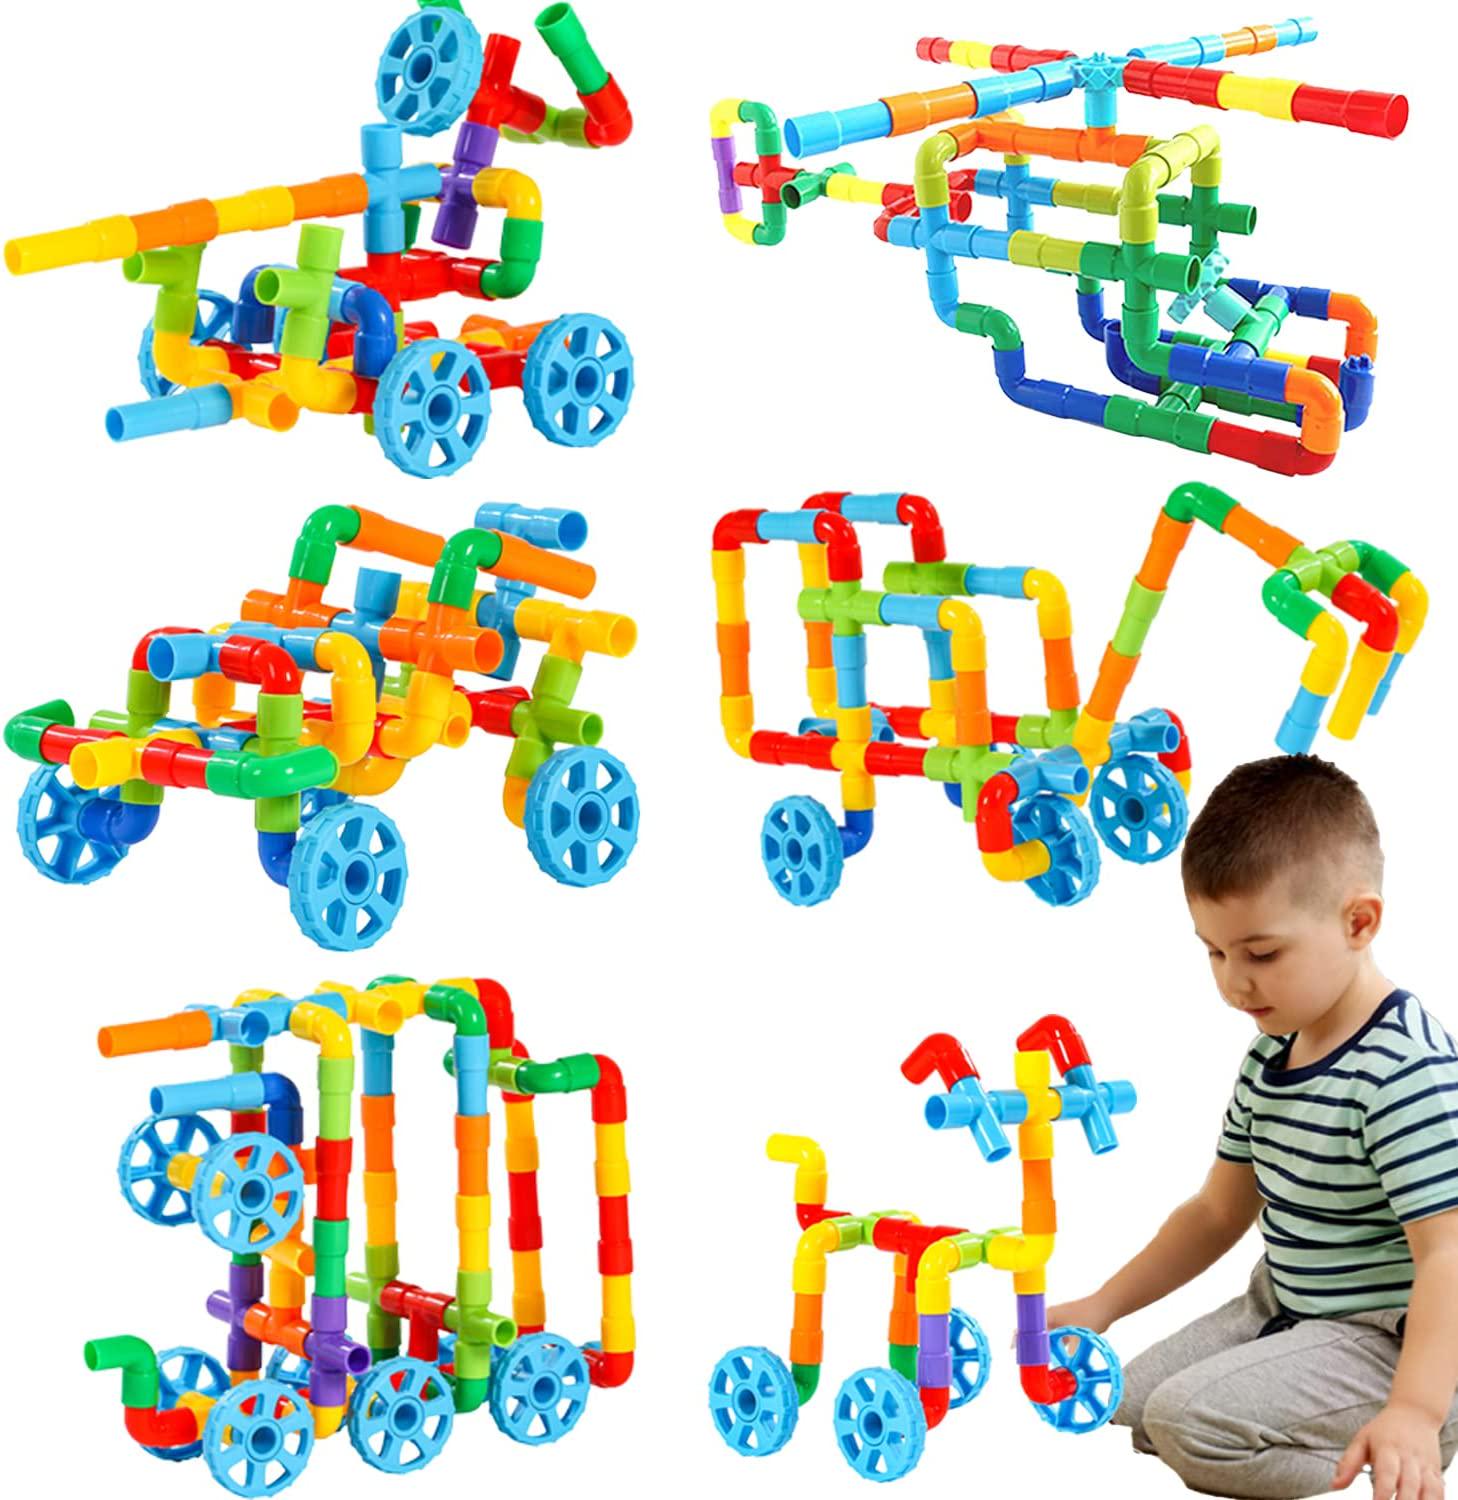 KUTOI, [Kutoi] STEM Building Toys, 72 Pc. Set, Early Learning Educational Tubular Pipes, Joints, and Wheels, Build Cars, Vehicles, Models, and Shapes, Interaction Construction Play